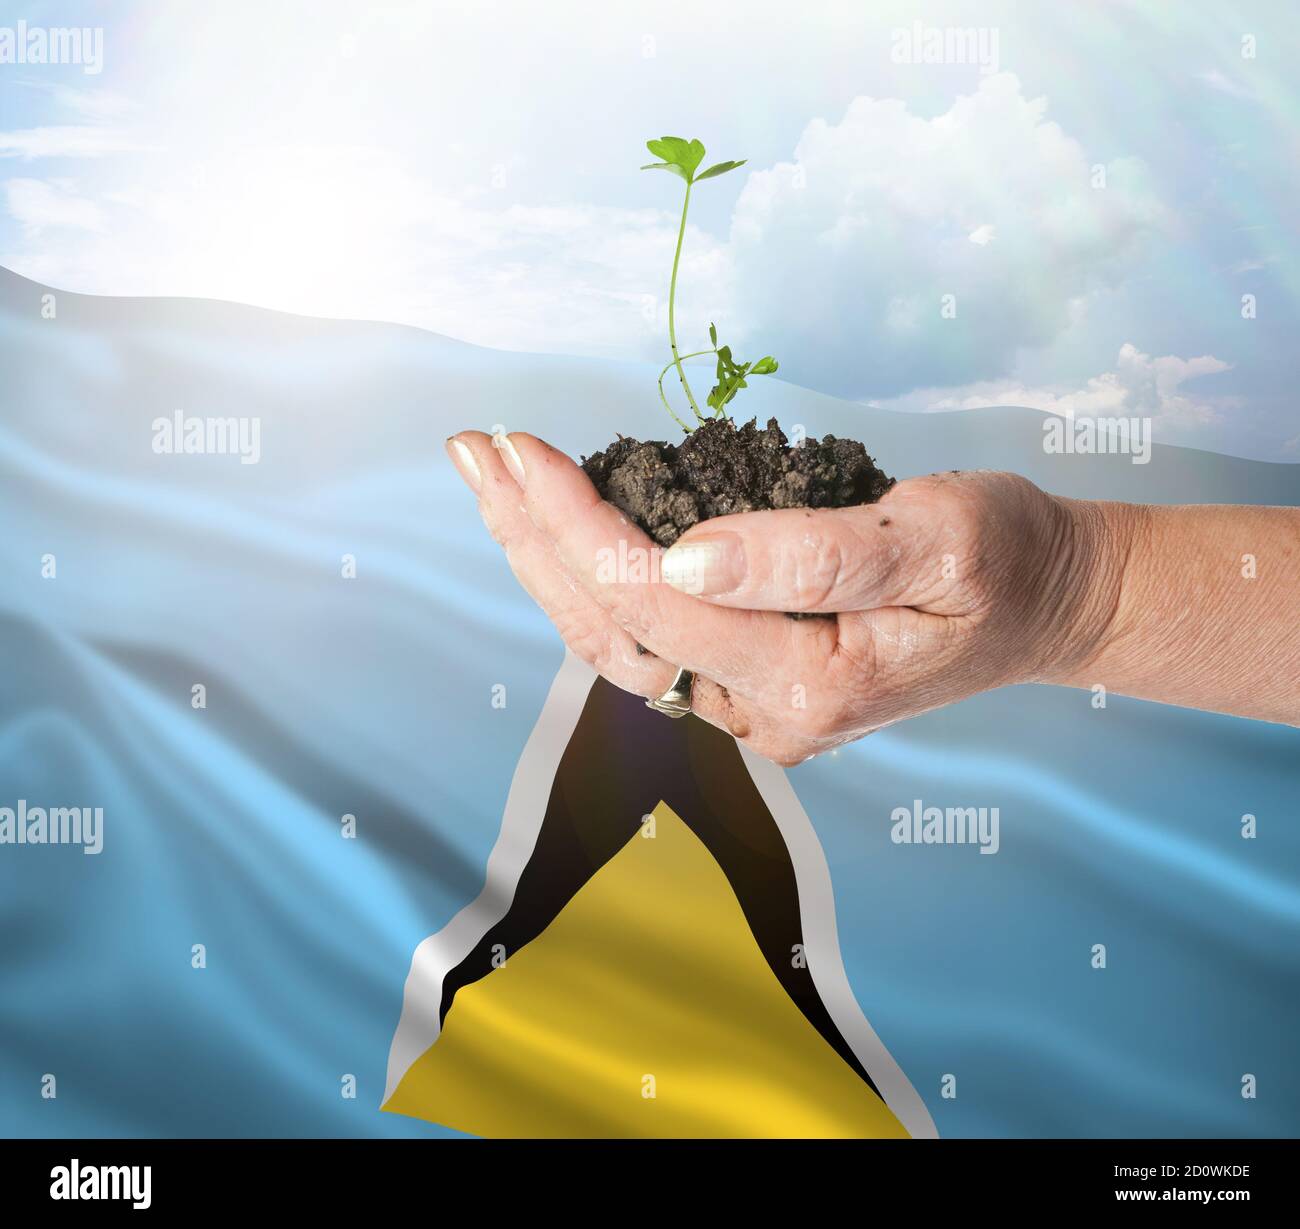 Saint Lucia growth and new beginning. Green renewable energy and ecology concept. Hand holding young plant. Stock Photo